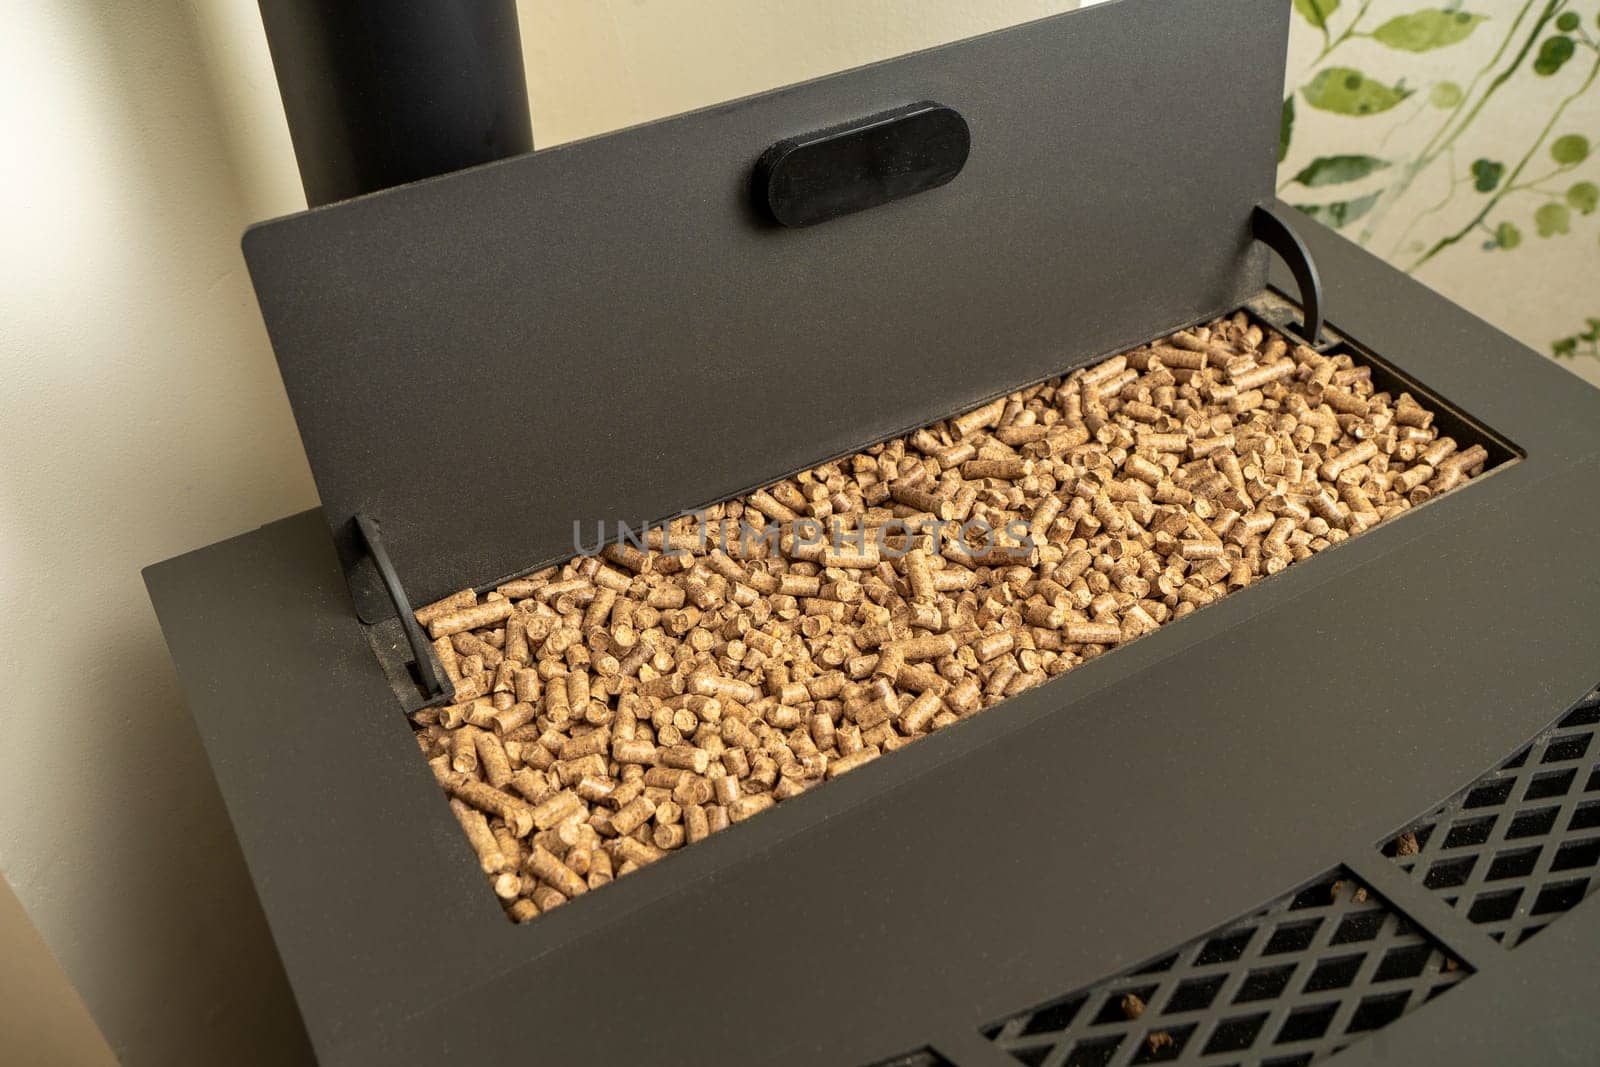 Image of a pellet stove with the hopper filled to the brim with ecological fuel, sustainable and renewable heat